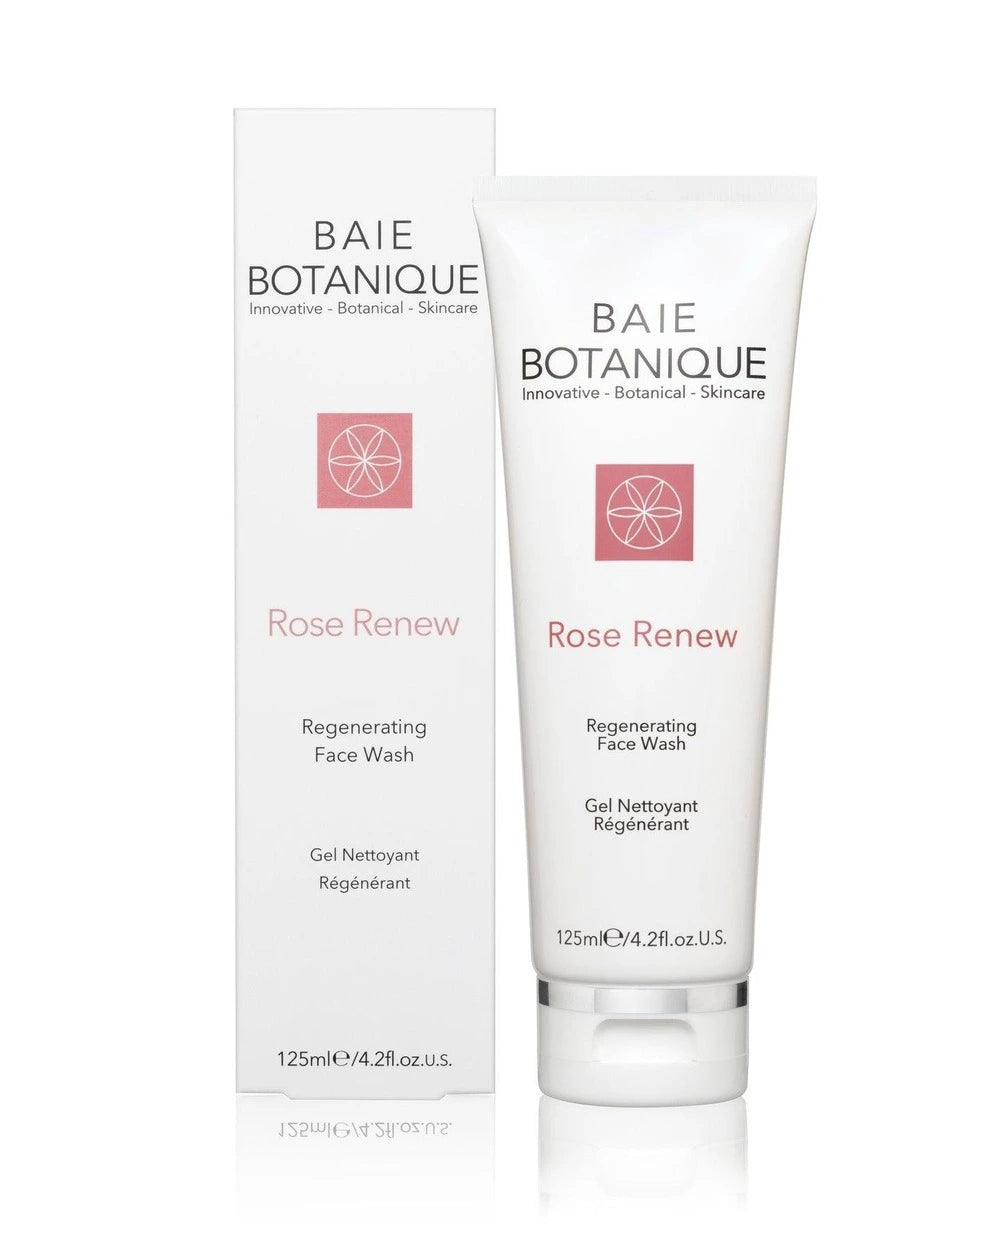 baie botanique rose renew cleanse hydrate glow